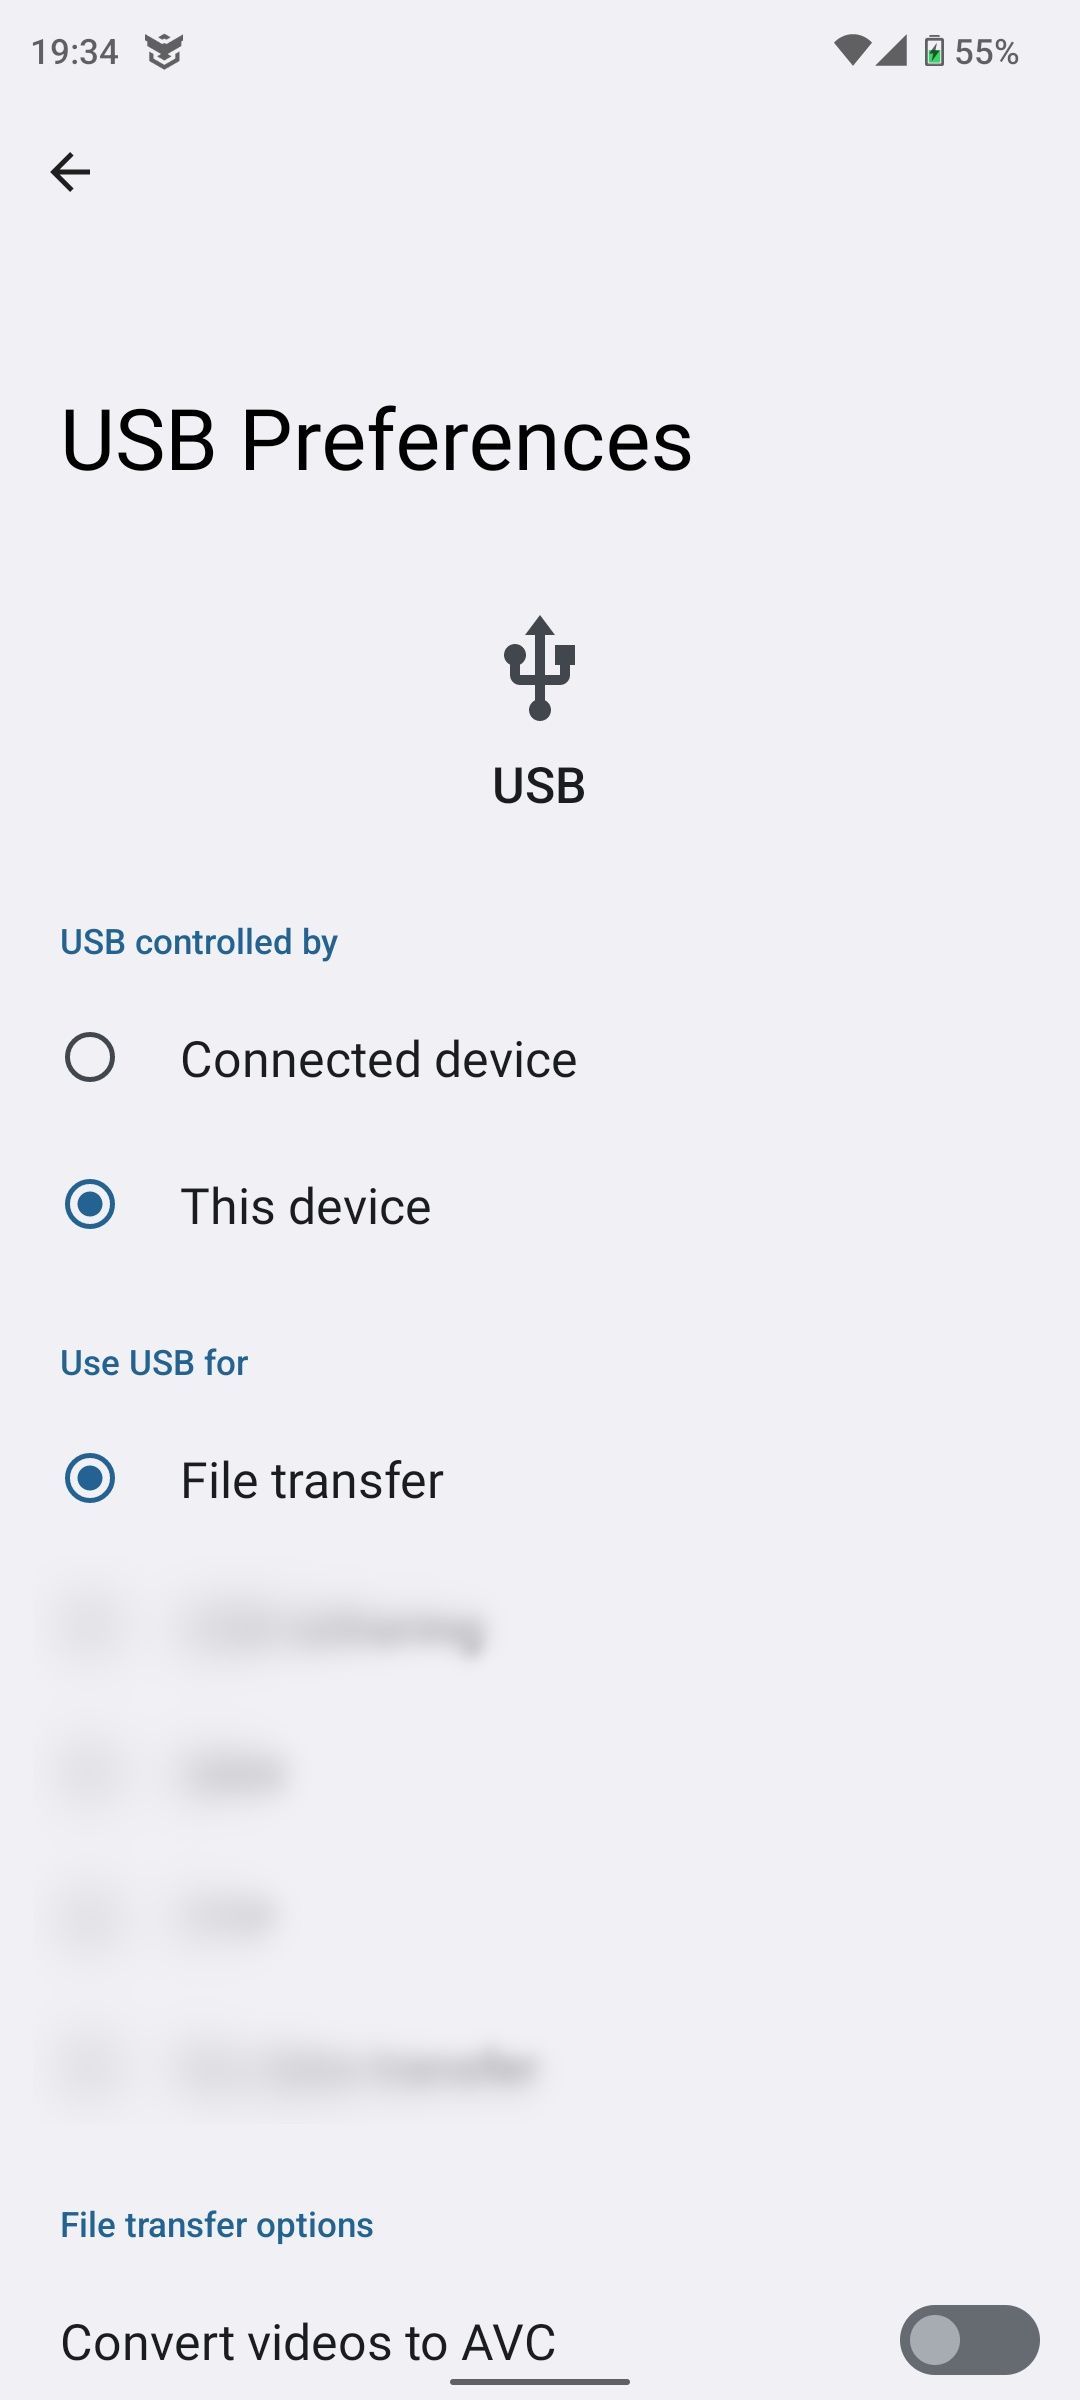 Enable USB file transfer on Android